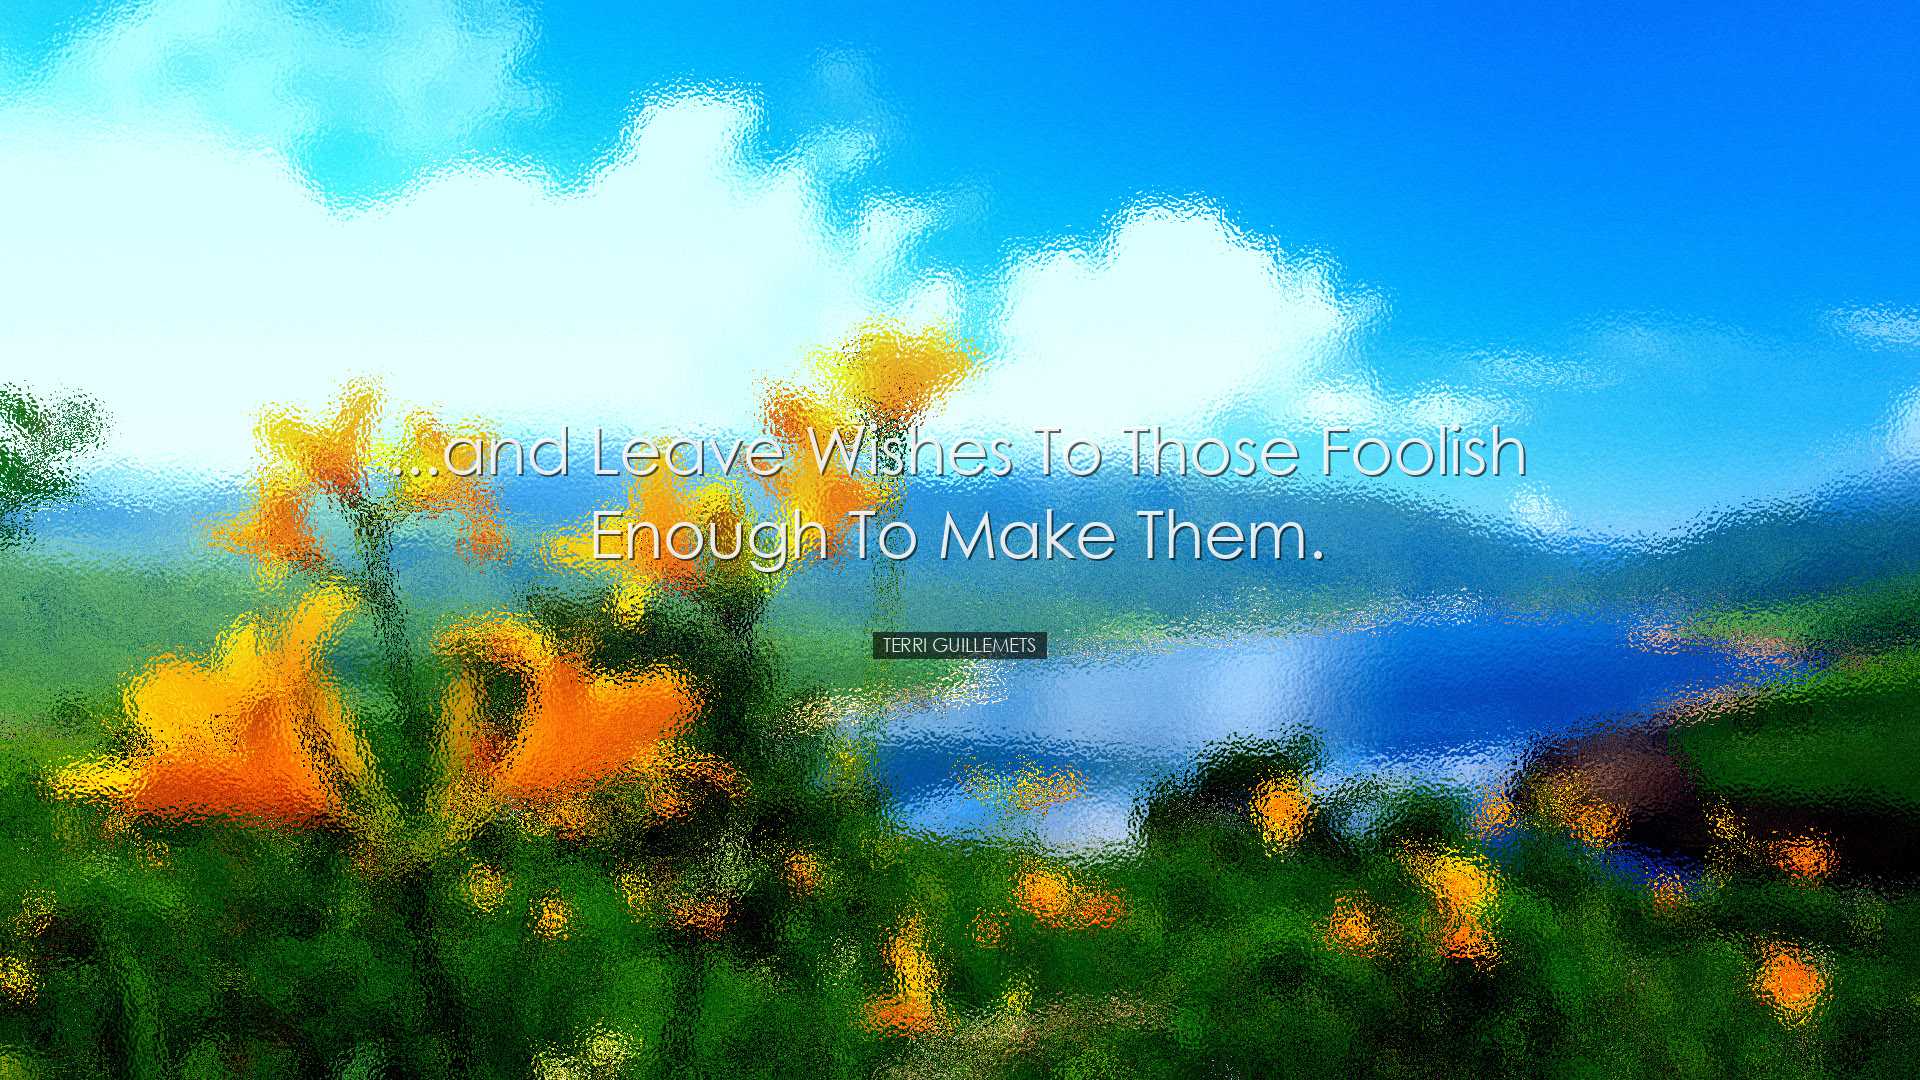 ...and leave wishes to those foolish enough to make them. - Terri